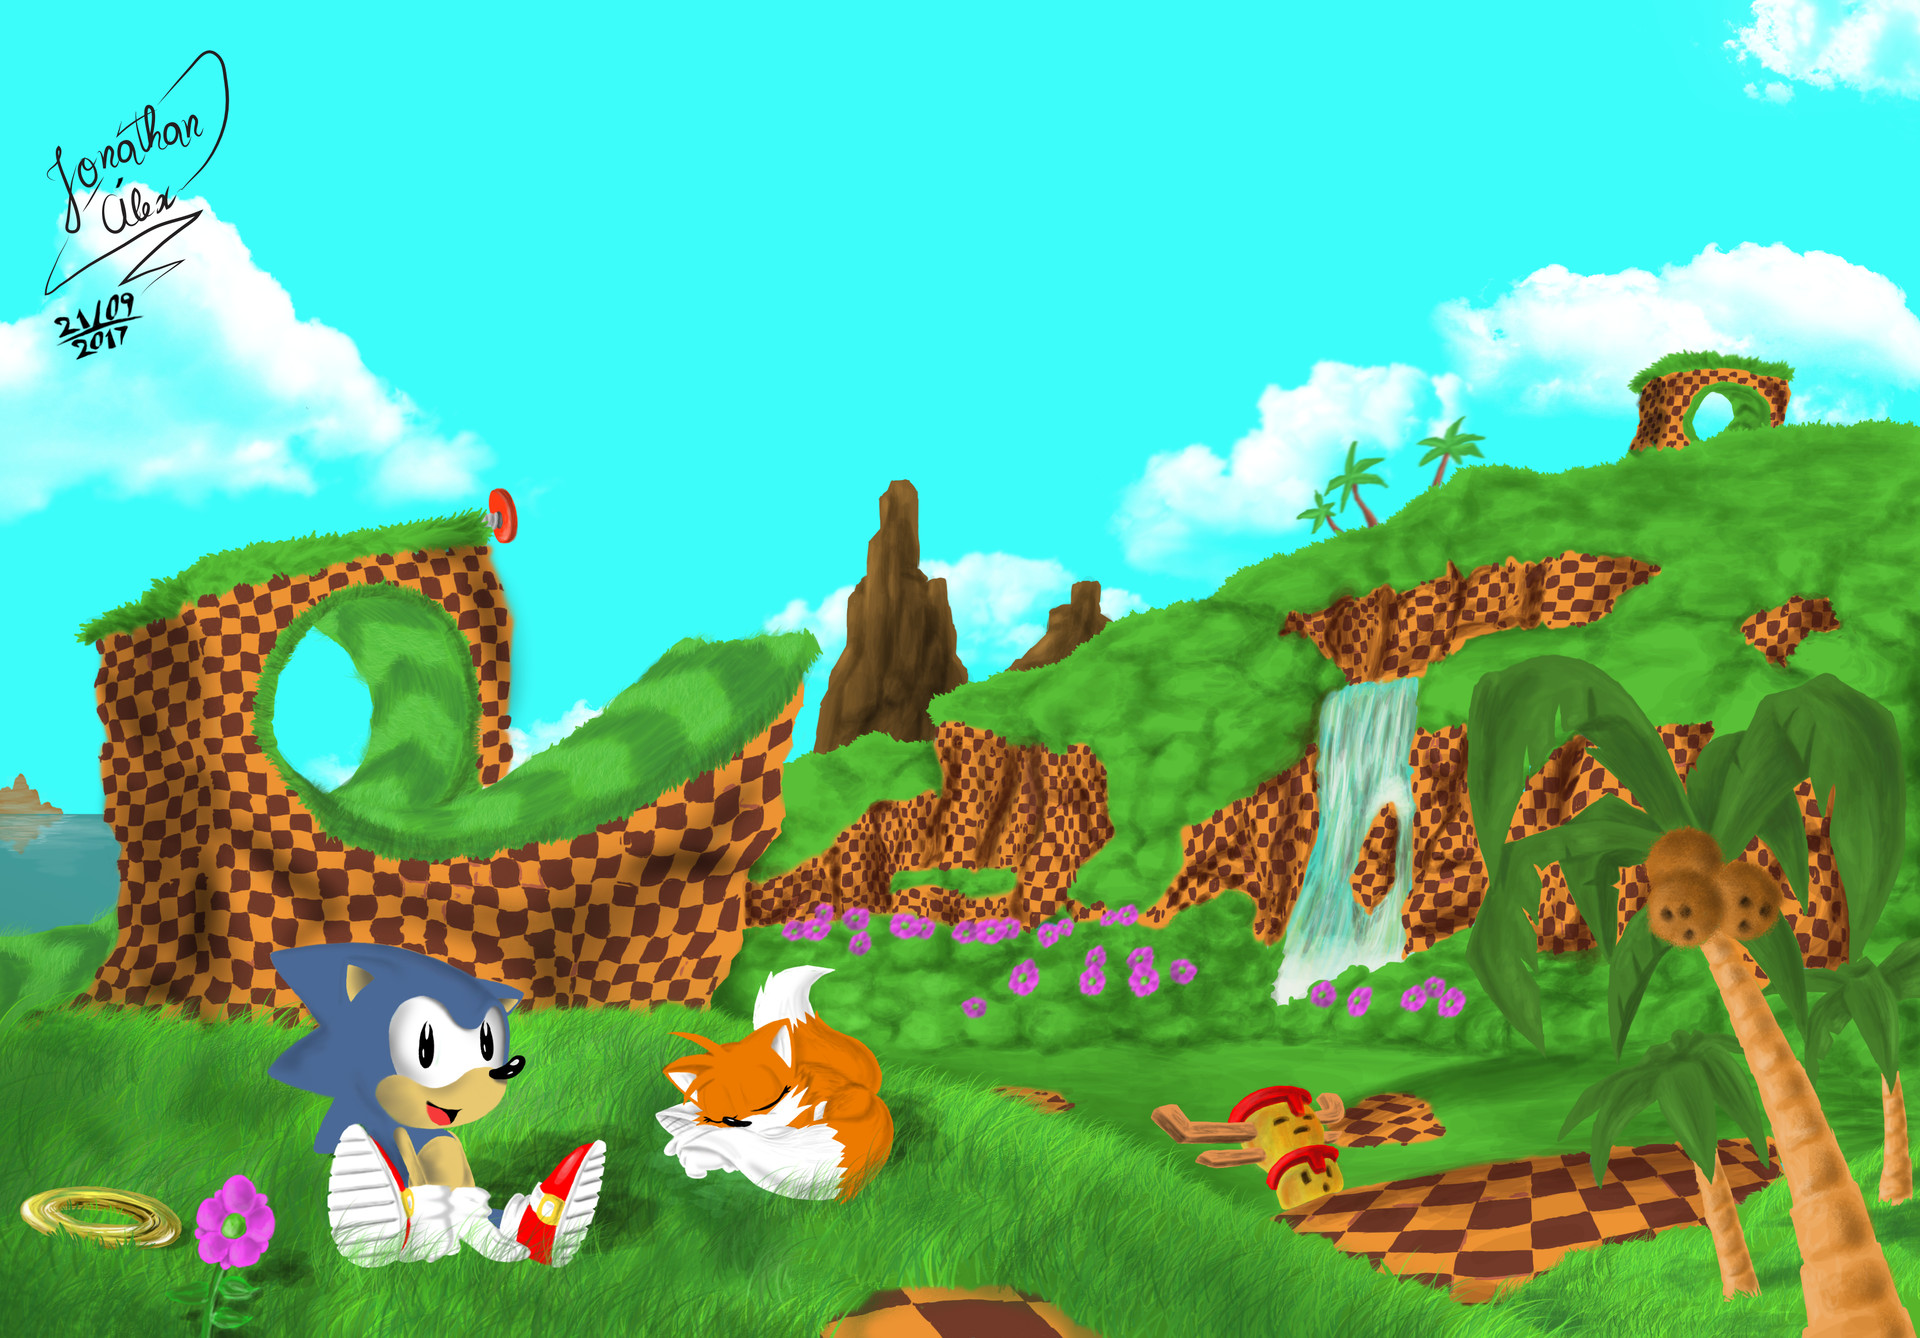 Sonic Green Hill Zone Watercolor Painting Reproduction Print